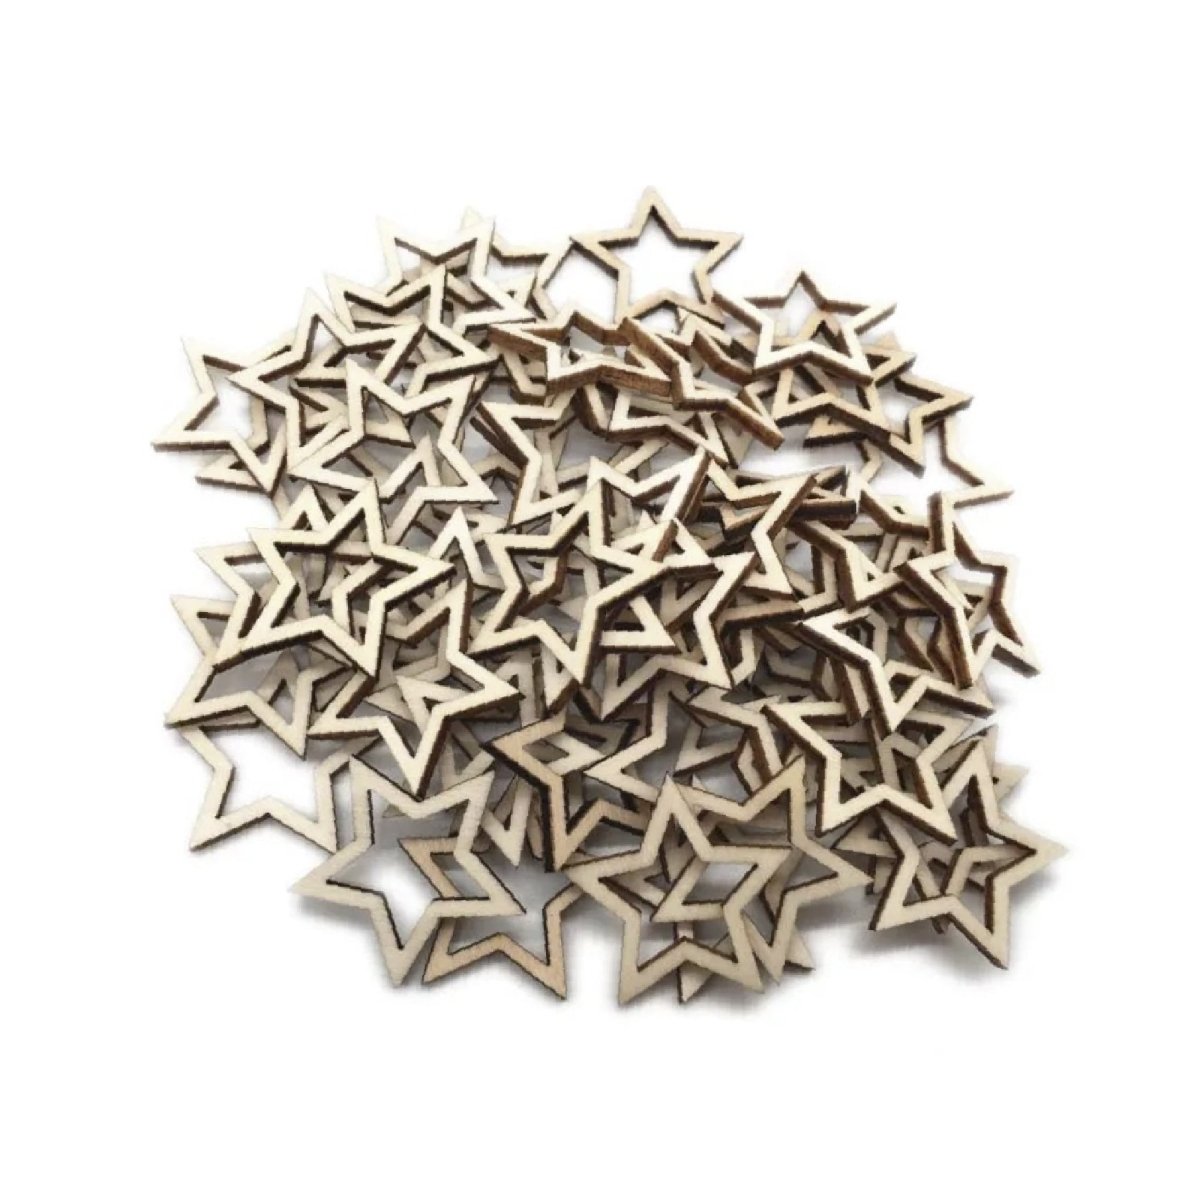 50/100pcs Wooden Stars Confetti 10-30mm Wood Crafts Decorations Centre-Removed - 50pcs 30mm - - Asia Sell